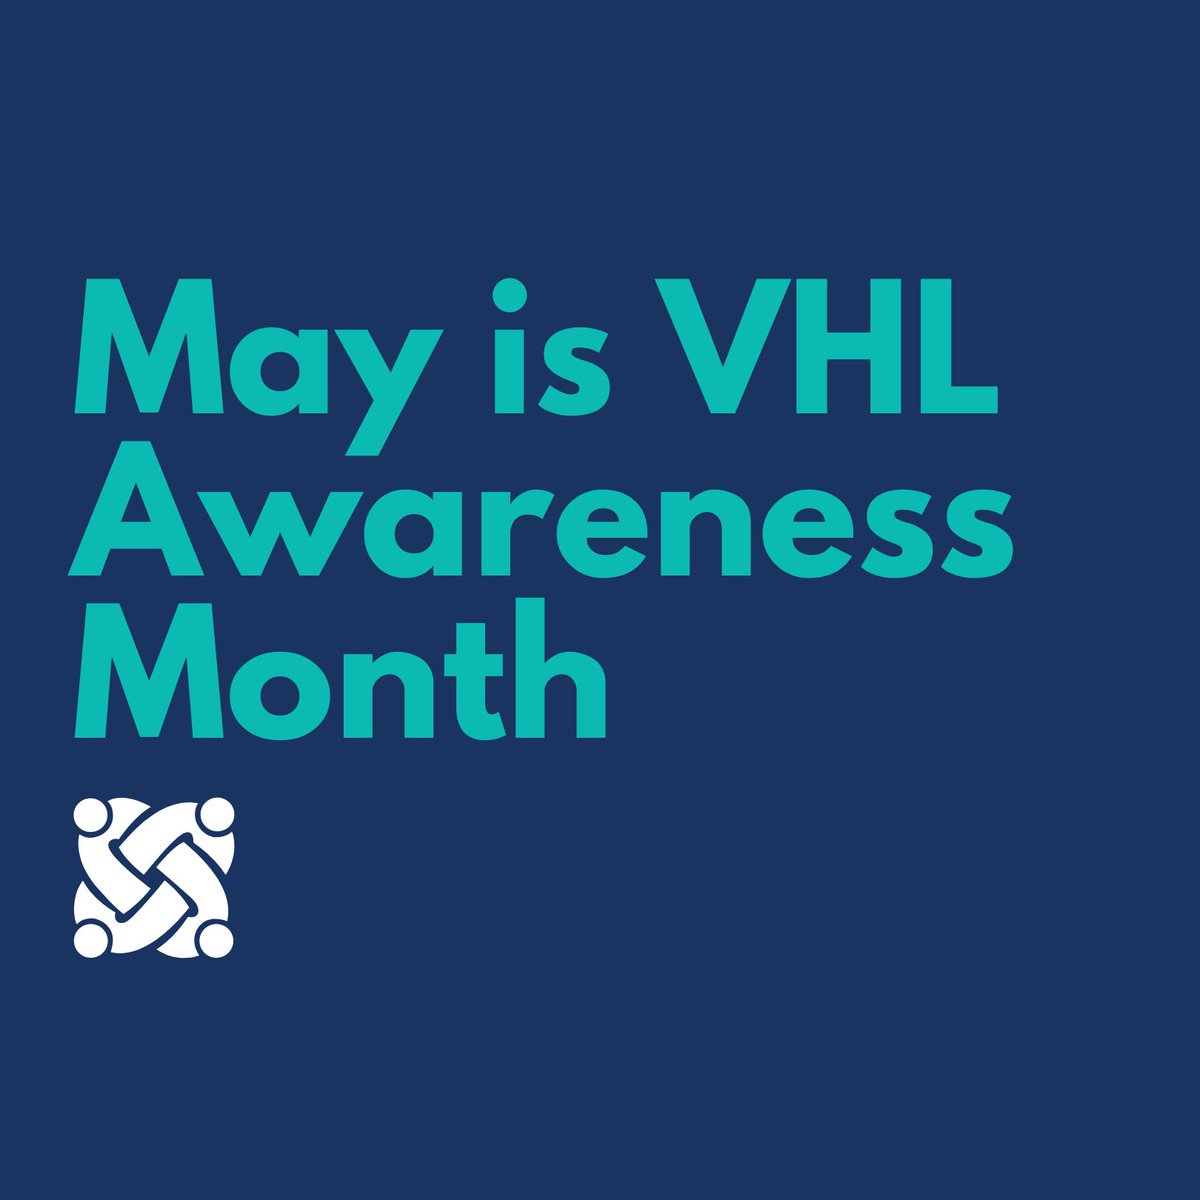 May is here, and so is VHL Awareness Month! Here's what's coming your way over the next few weeks: 🌟 Shareable social media content to educate and inspire. 🚶‍♀️ VHL Awareness Walk promo ahead of the big day on May 18th! 👋 Updates on what we're working on behind the scenes